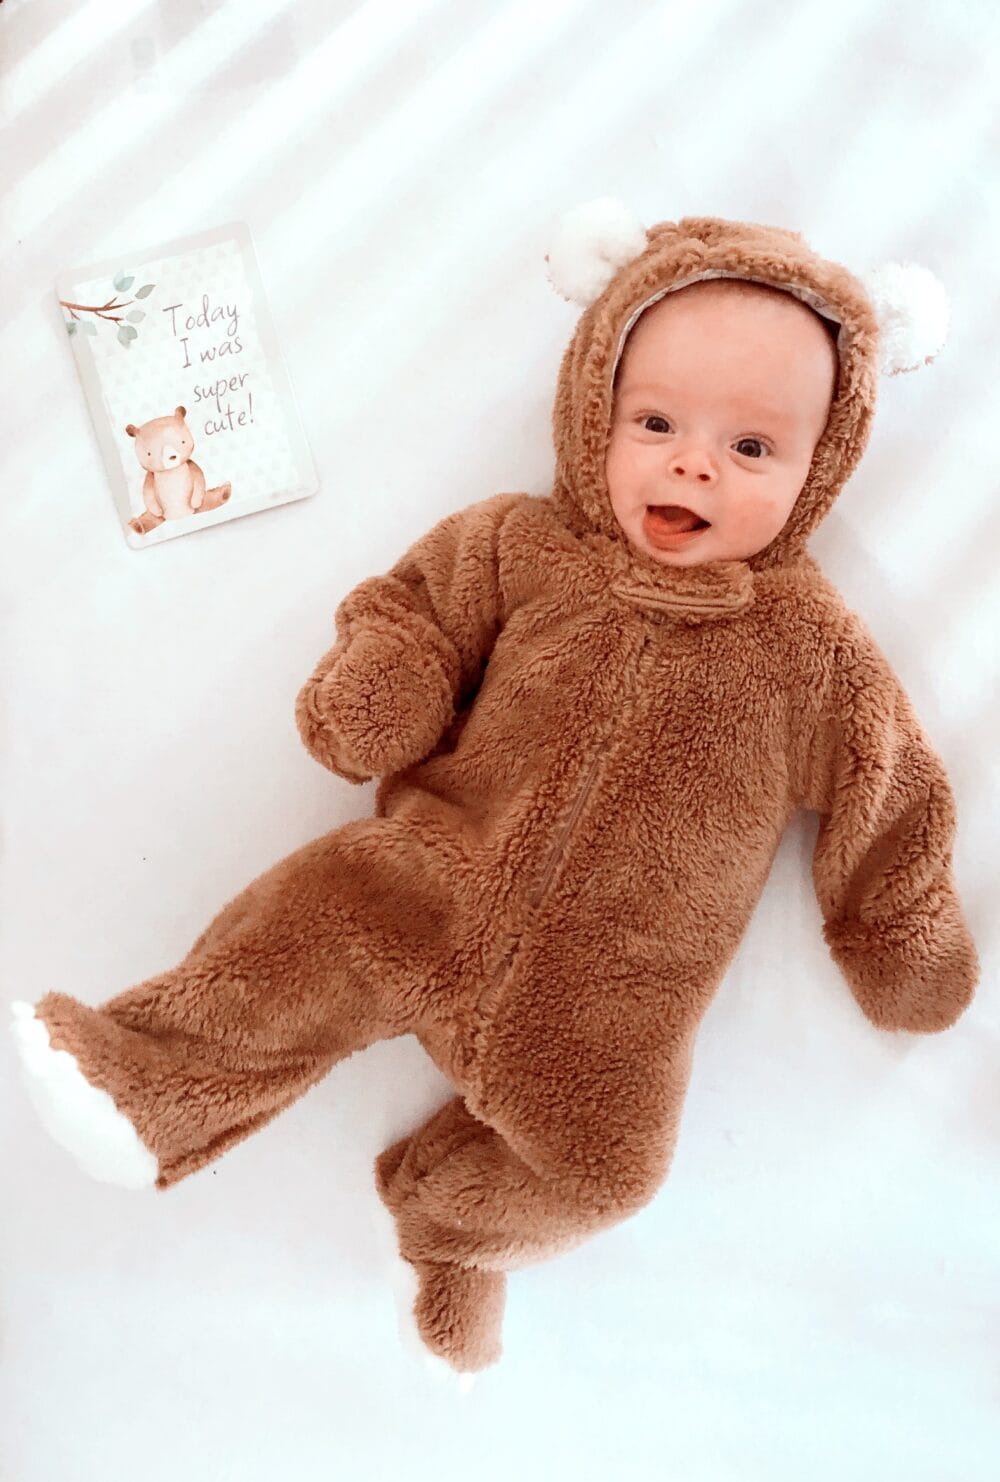 A baby in a bear costume laying on a bed.